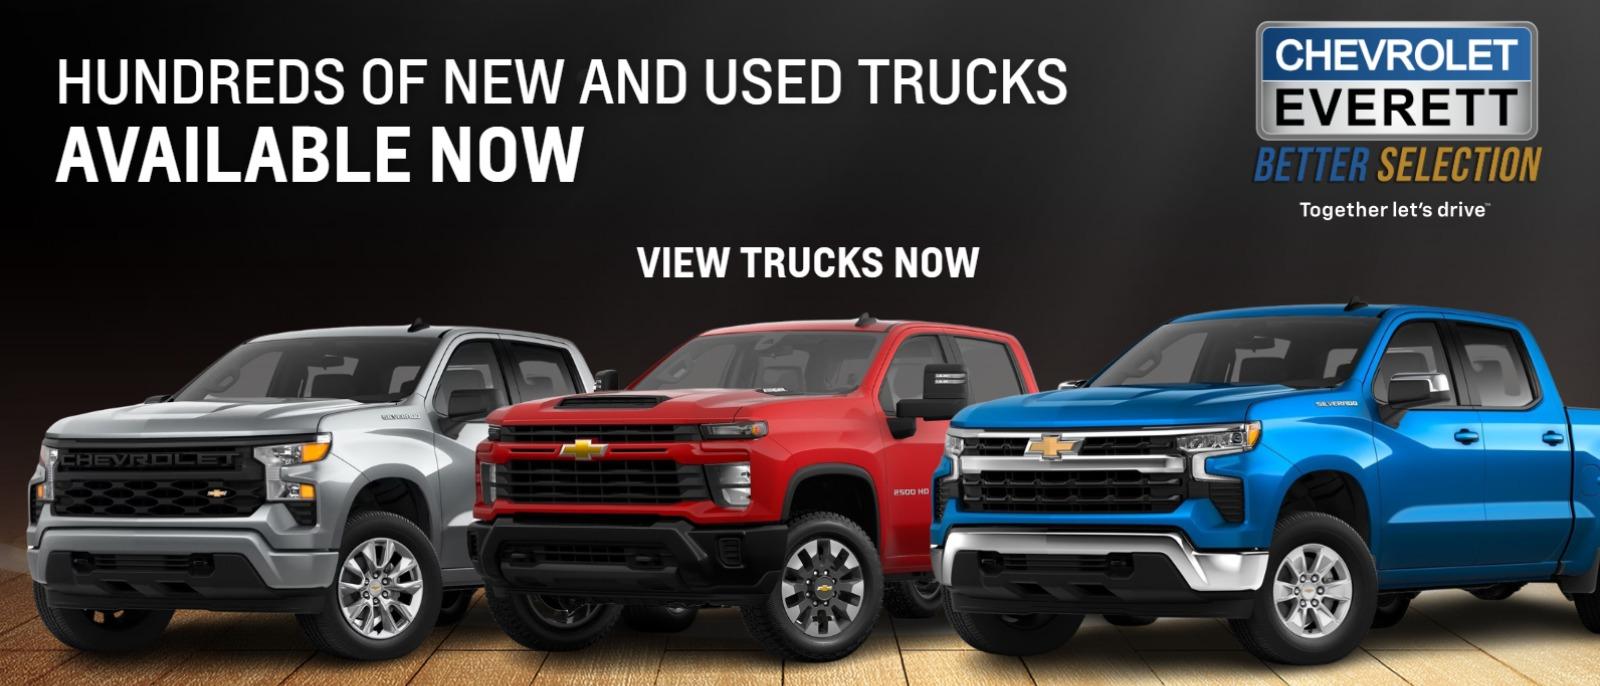 Hundreds of new and used Trucks
Available Now